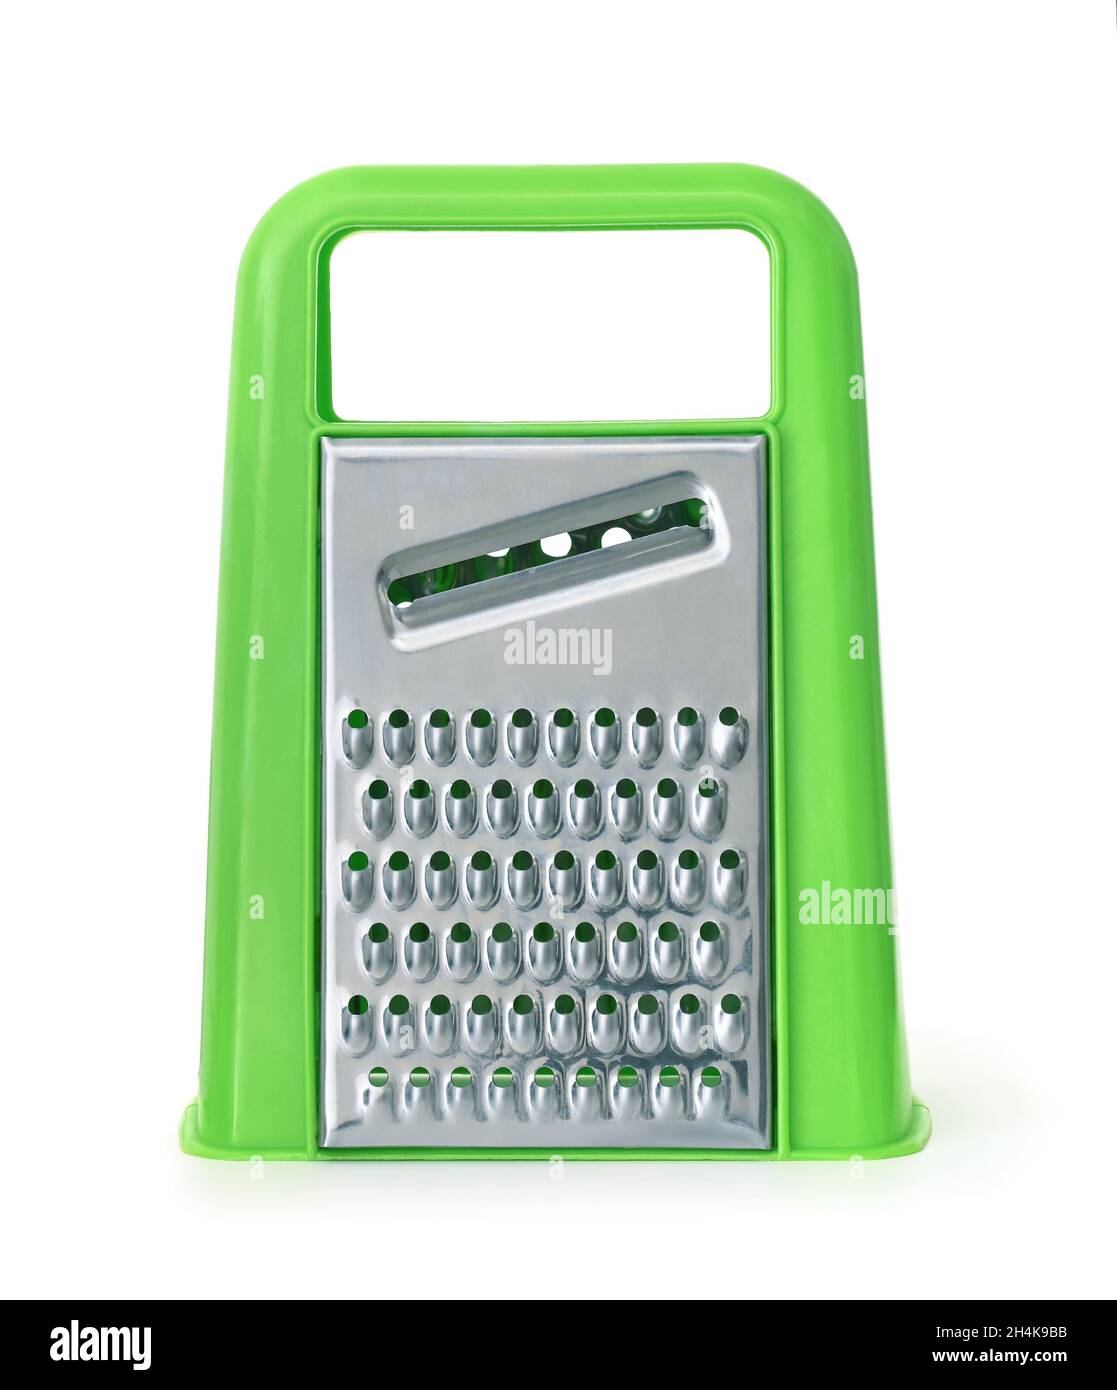 4-in-1 Vegetable&Cheese Grater, Box Grater for Cheese Stainless